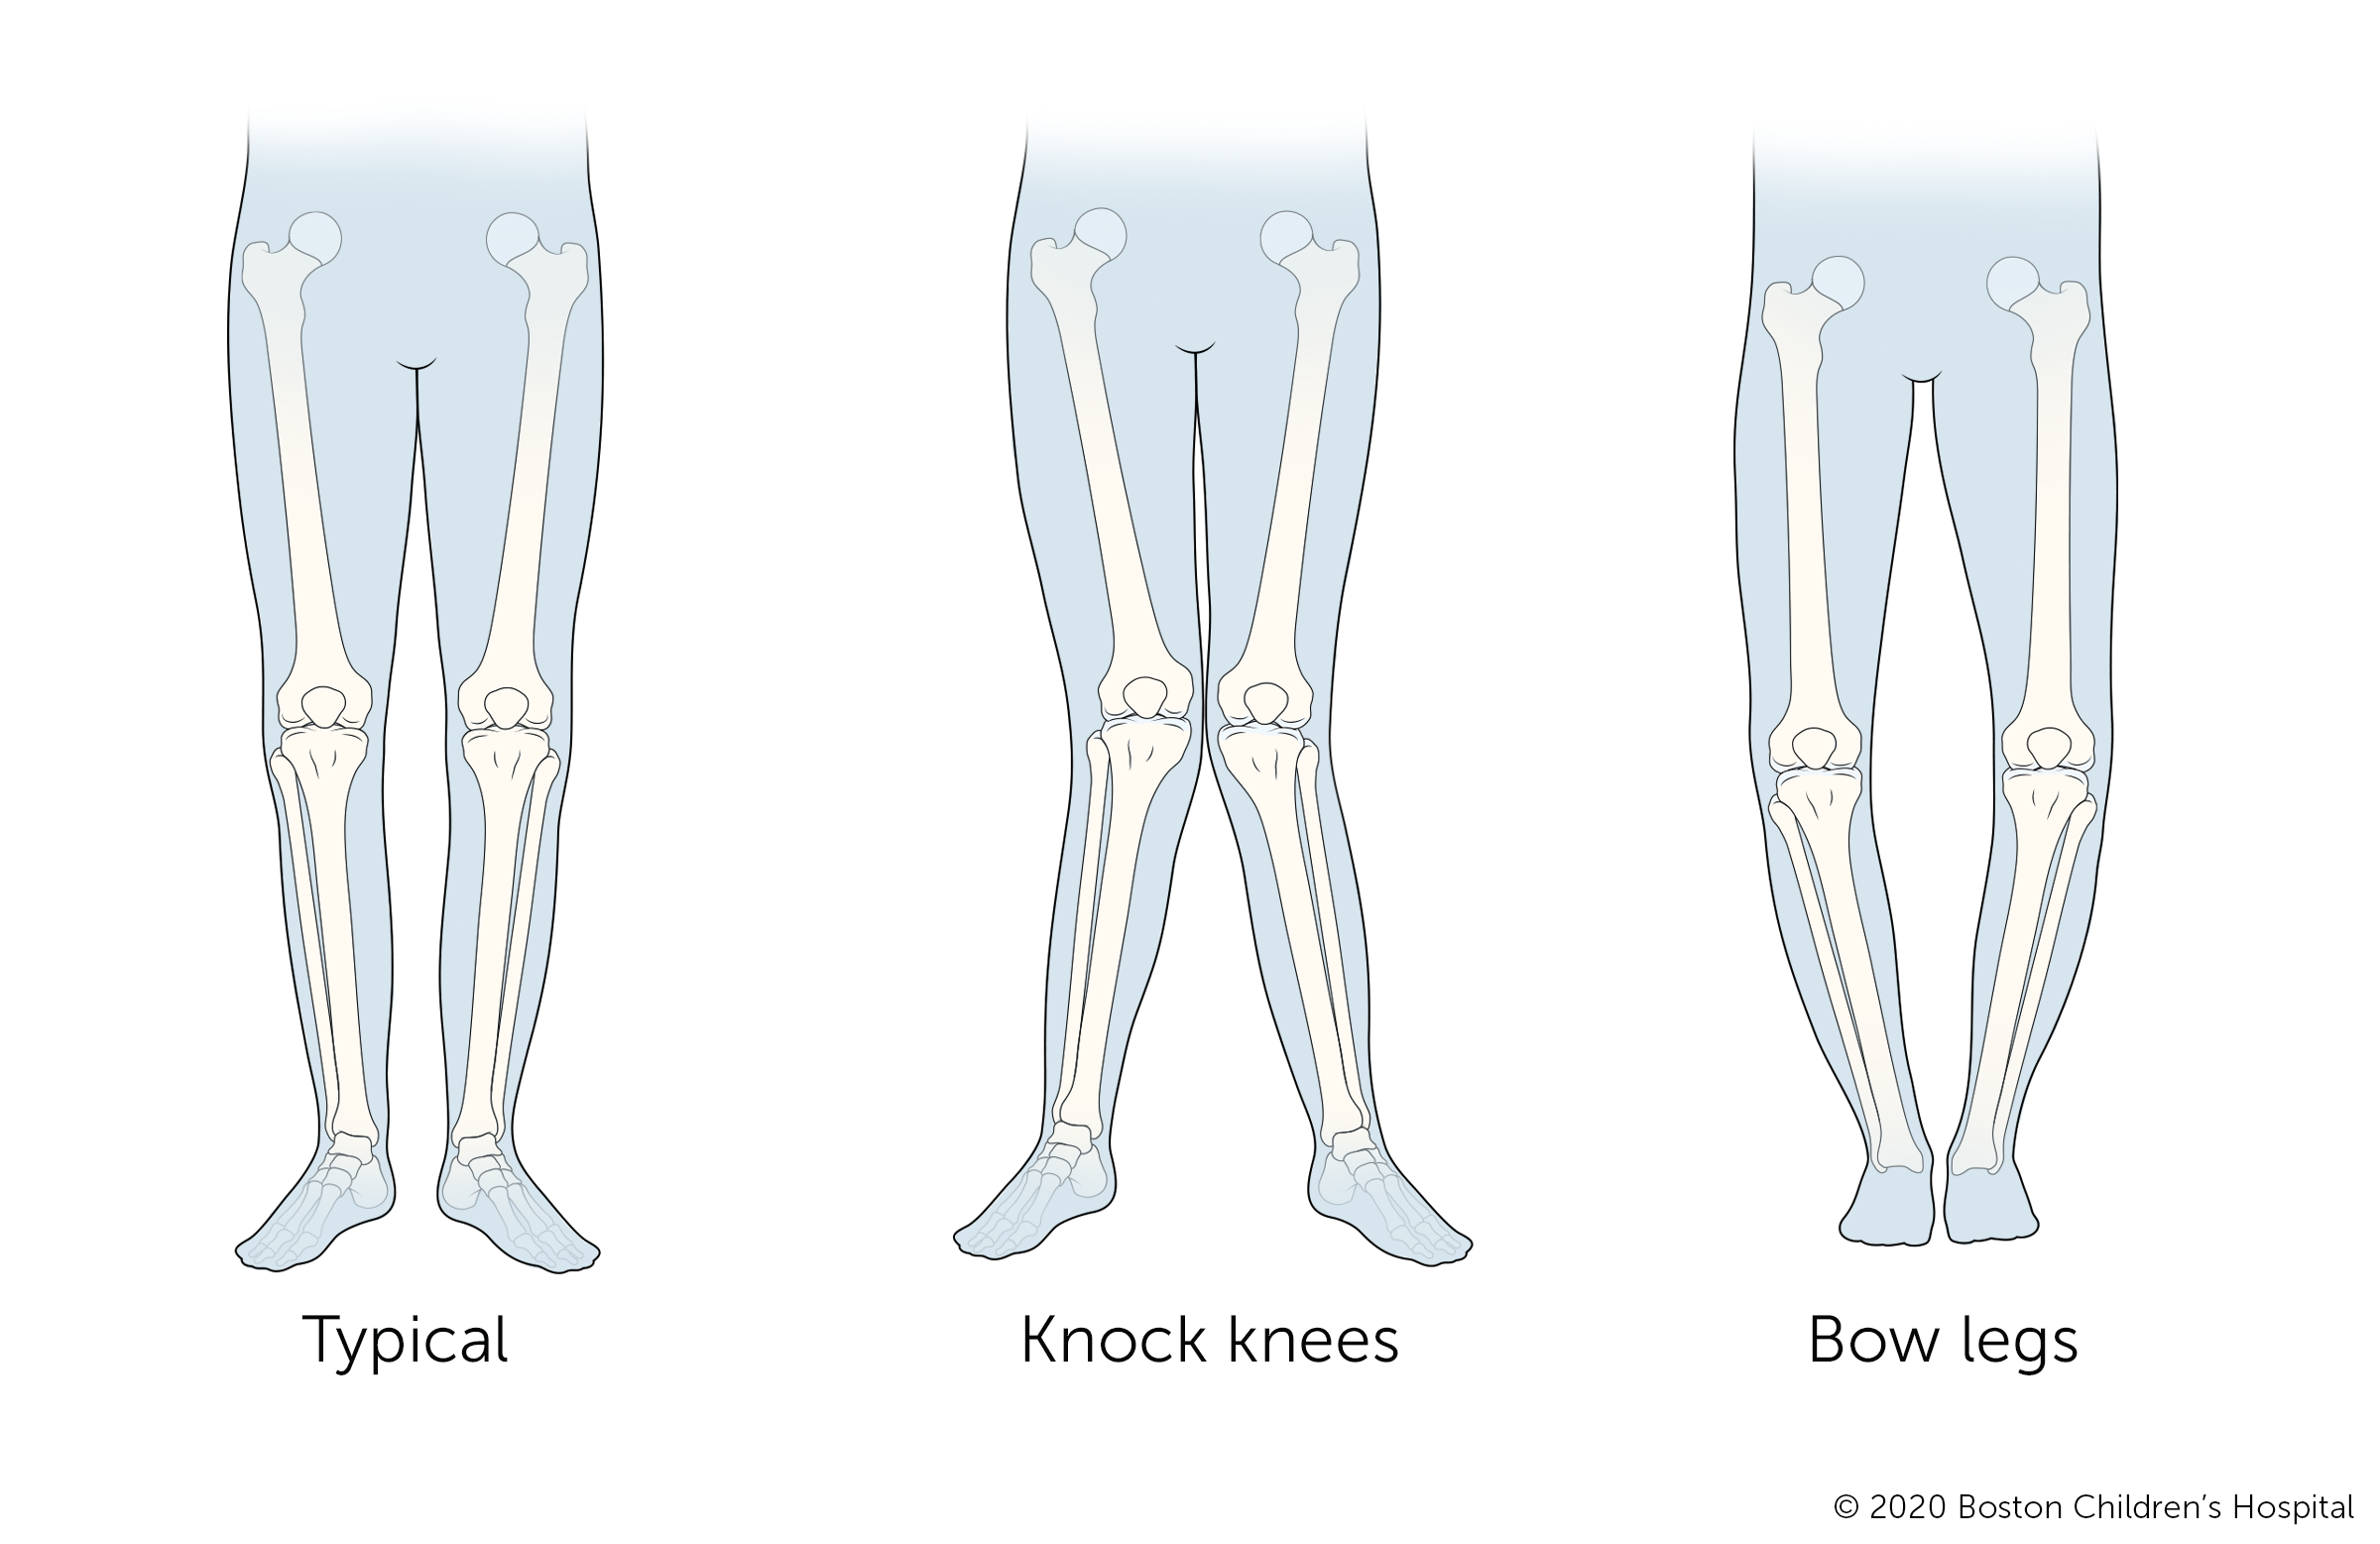 An illustration of typical legs, legs with knock knees, and legs with bowlegs.